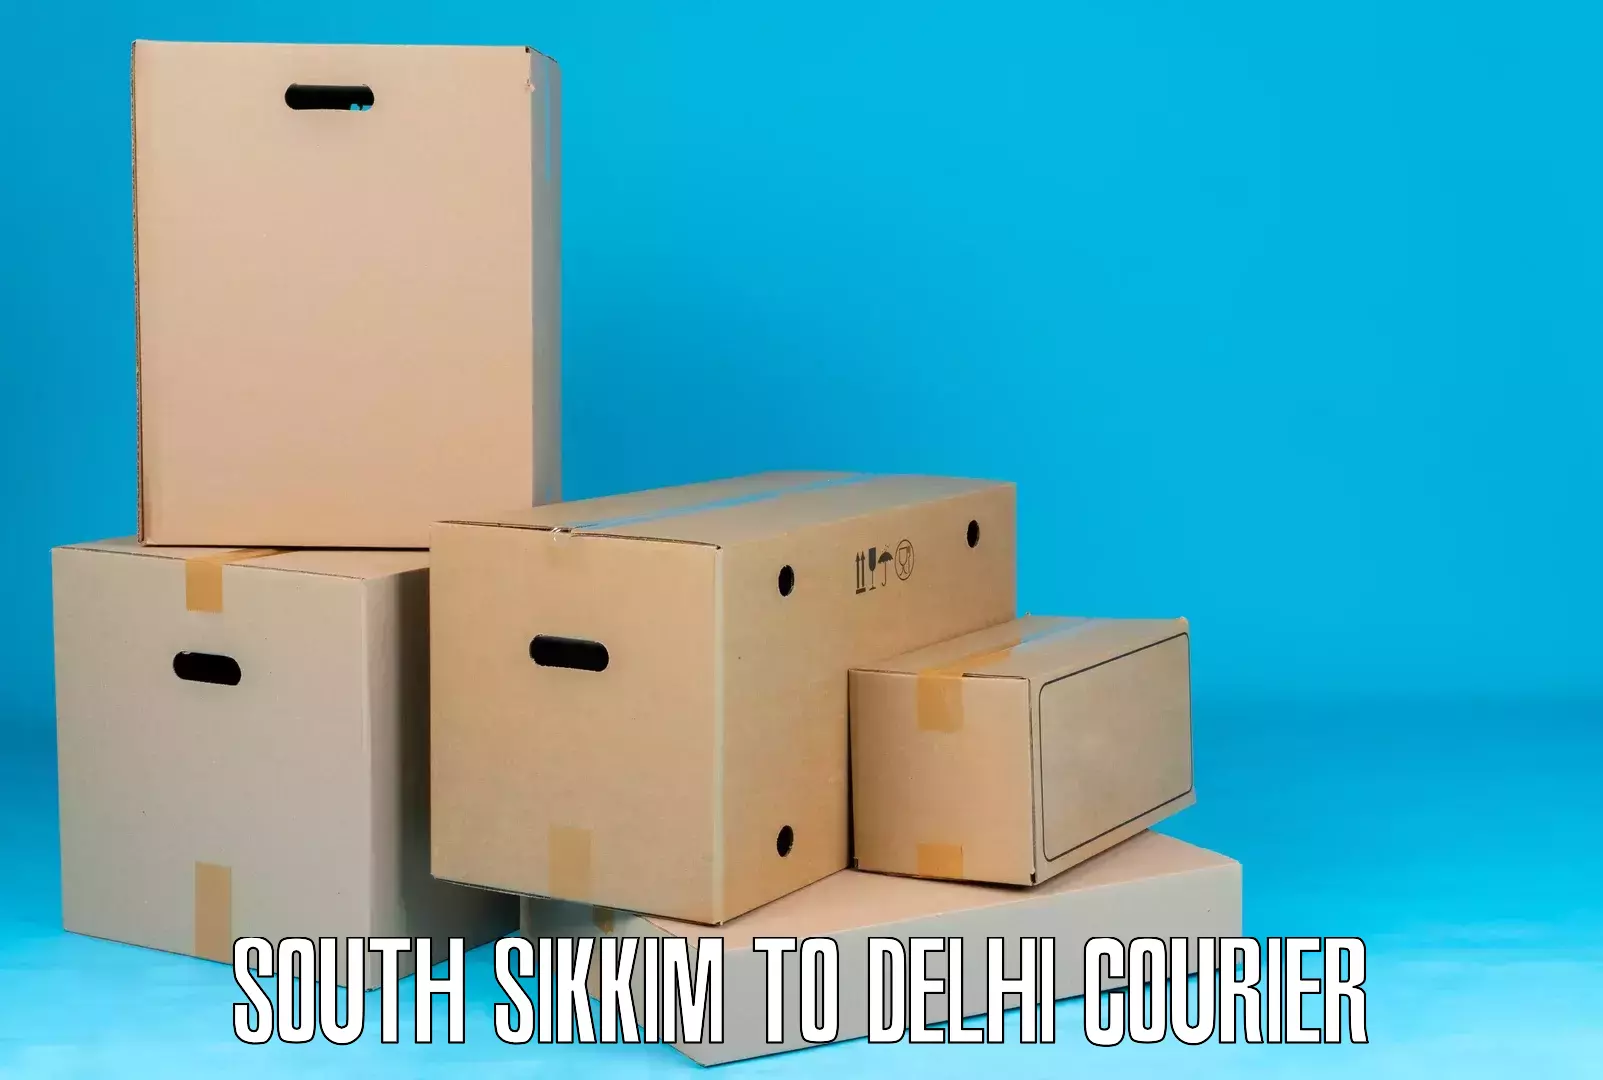 Urban courier service South Sikkim to University of Delhi